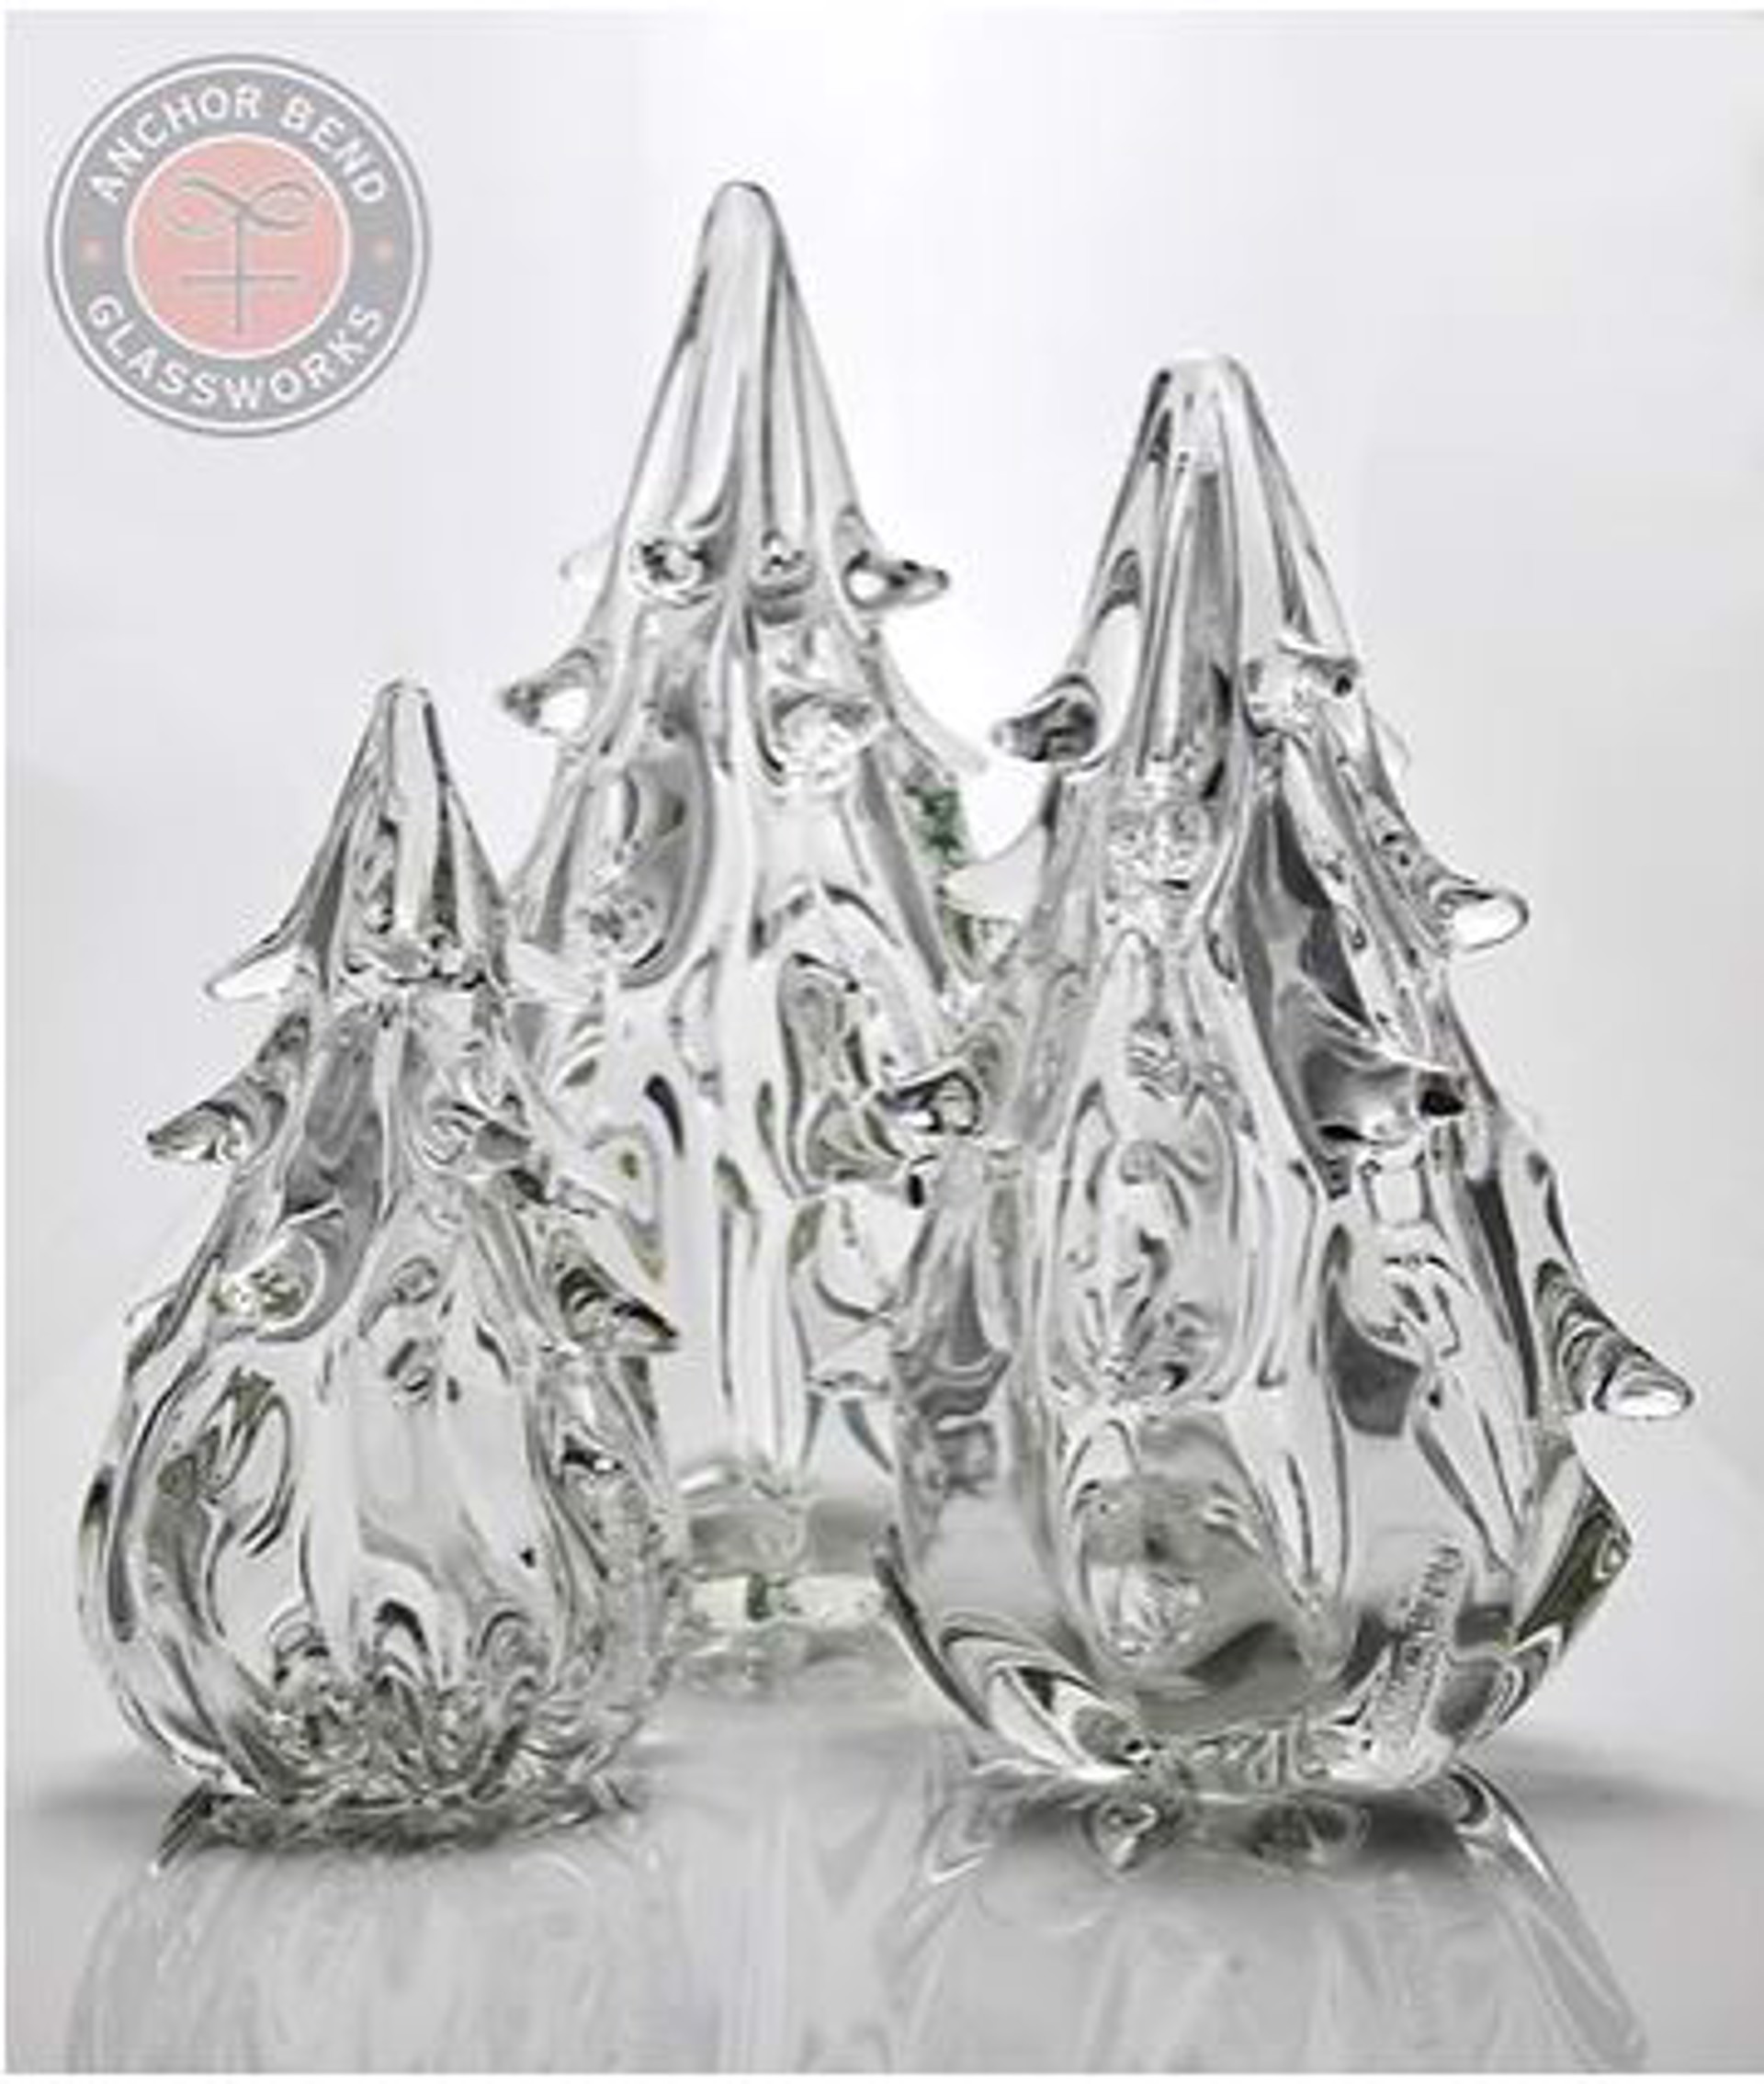 Medium Glass Tree by Anchor Bend Glassworks